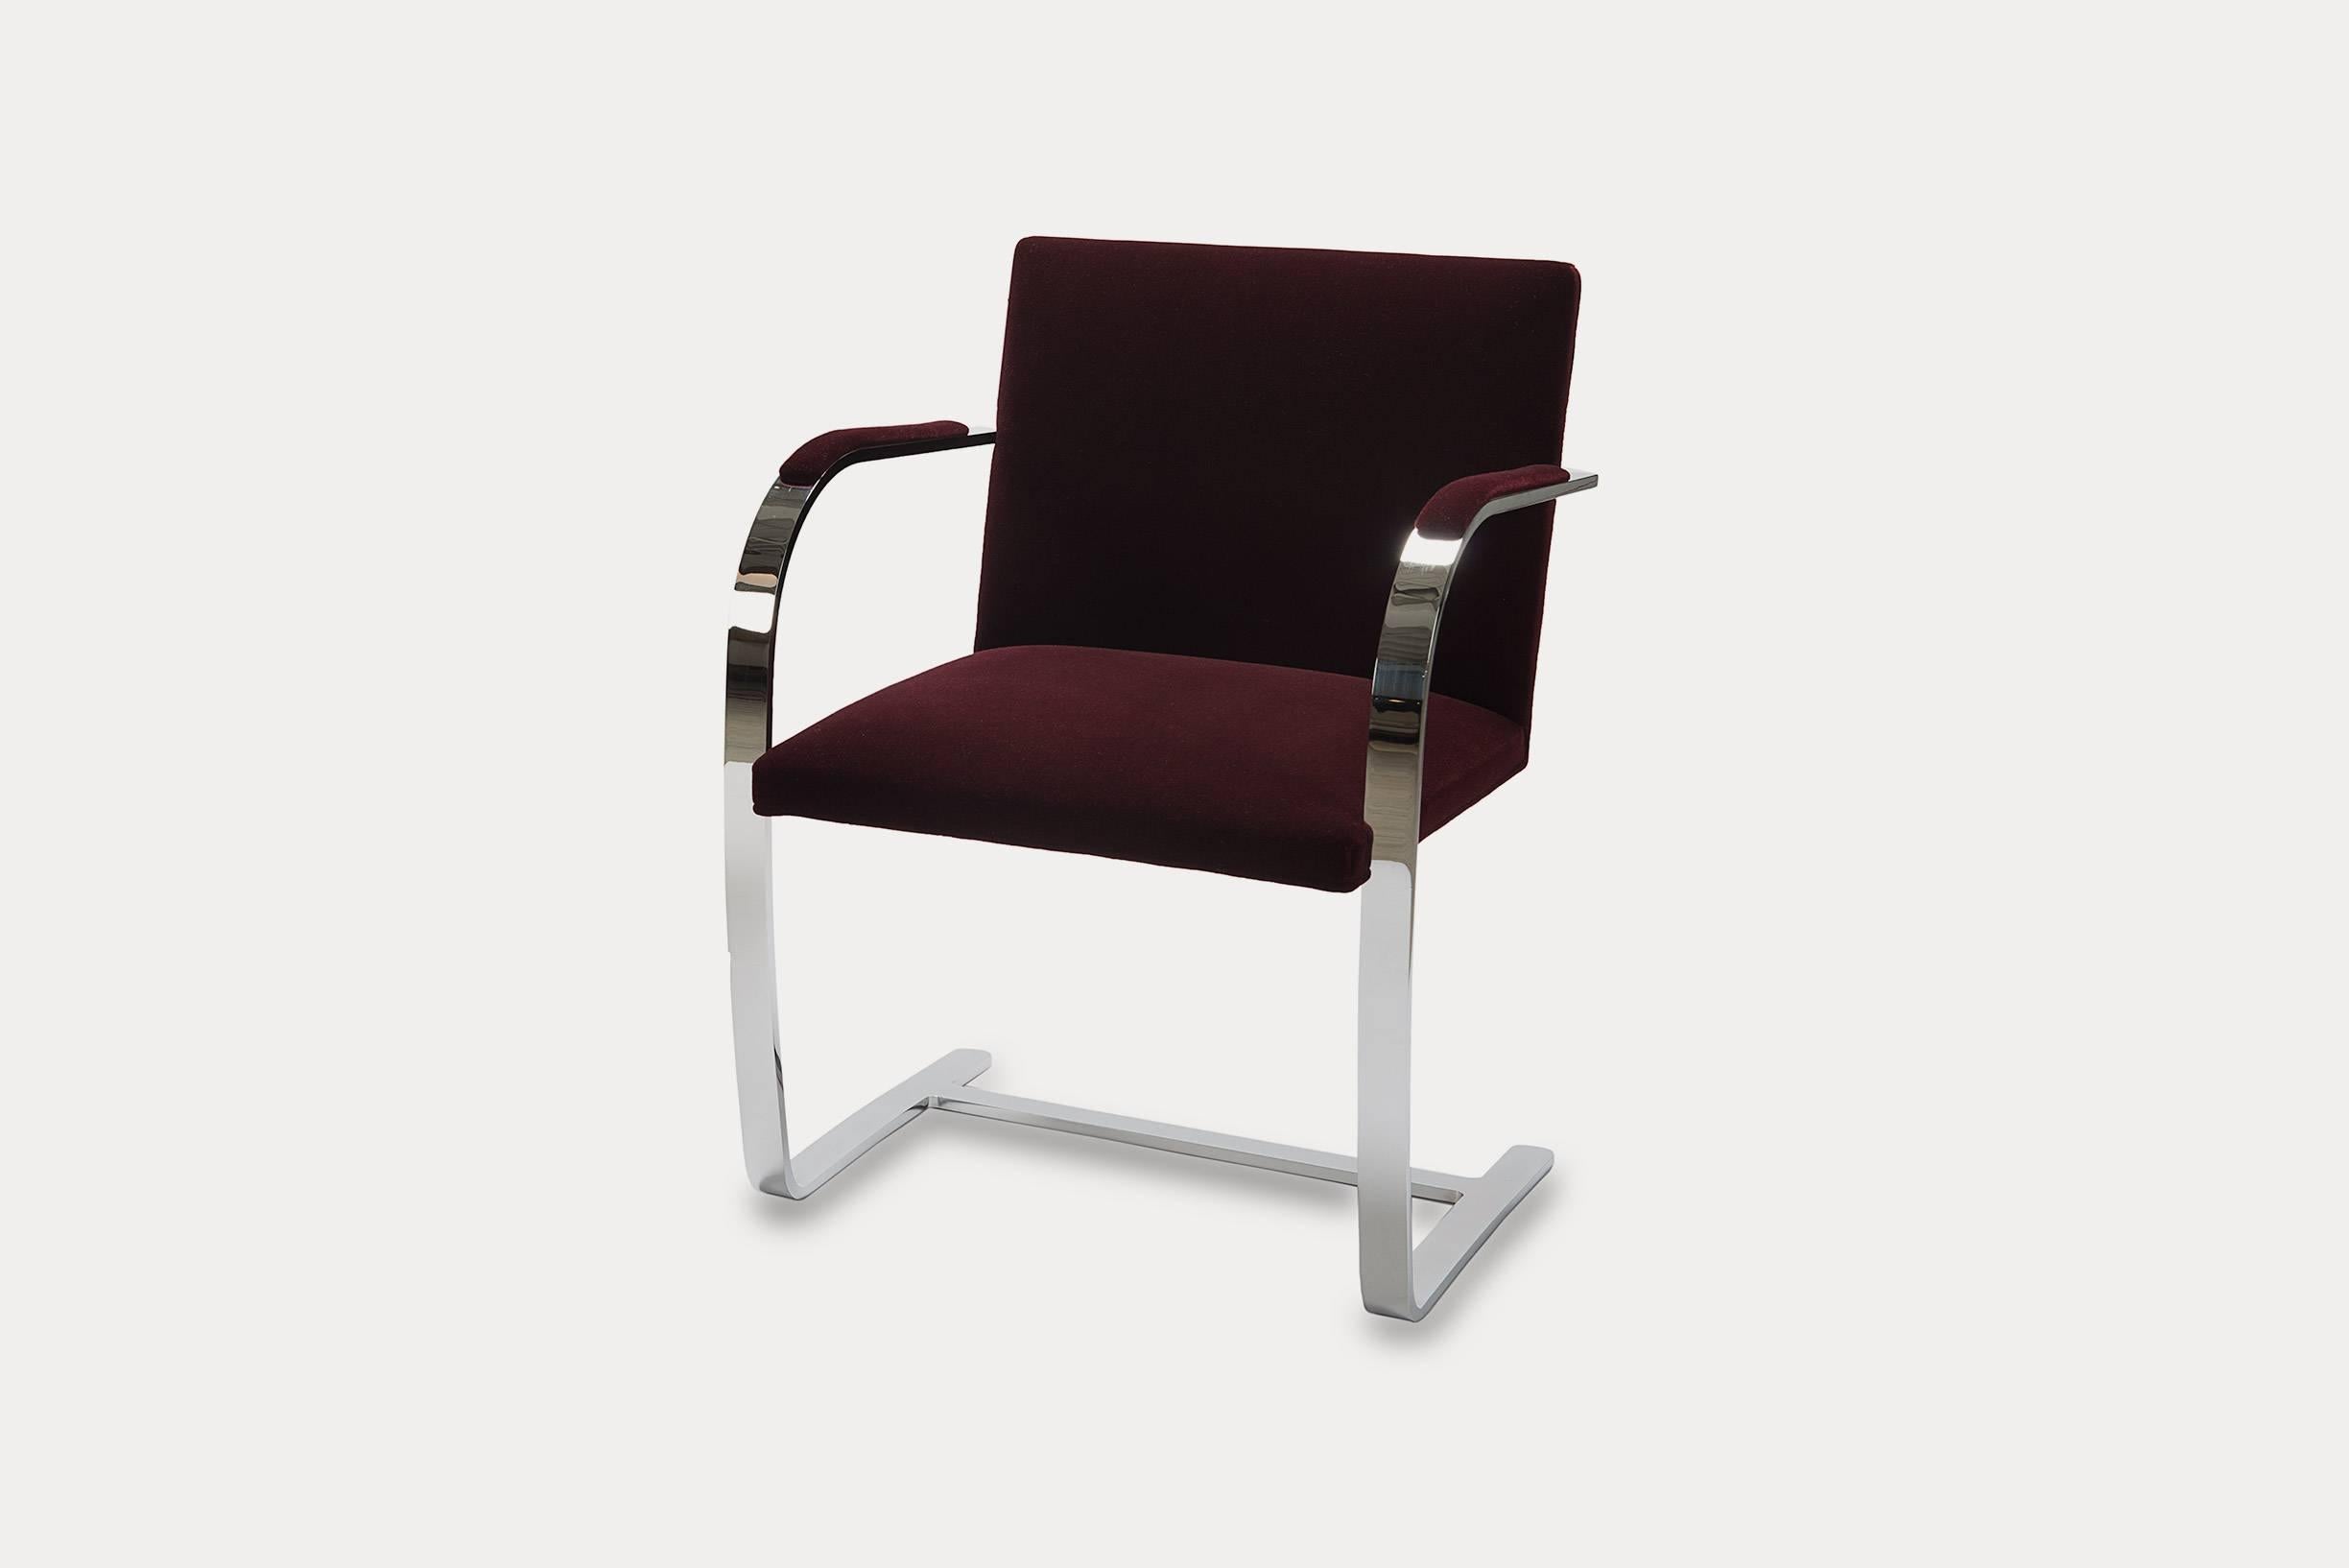 This Knoll Brno Flat Bar Armchair was designed by Meis van der Rohe in 1930 for his renowned Tugendhat House in Brno, Czech Republic, the Brno chair reflects the groundbreaking simplicity of its original environment. The chair, an icon of 20th